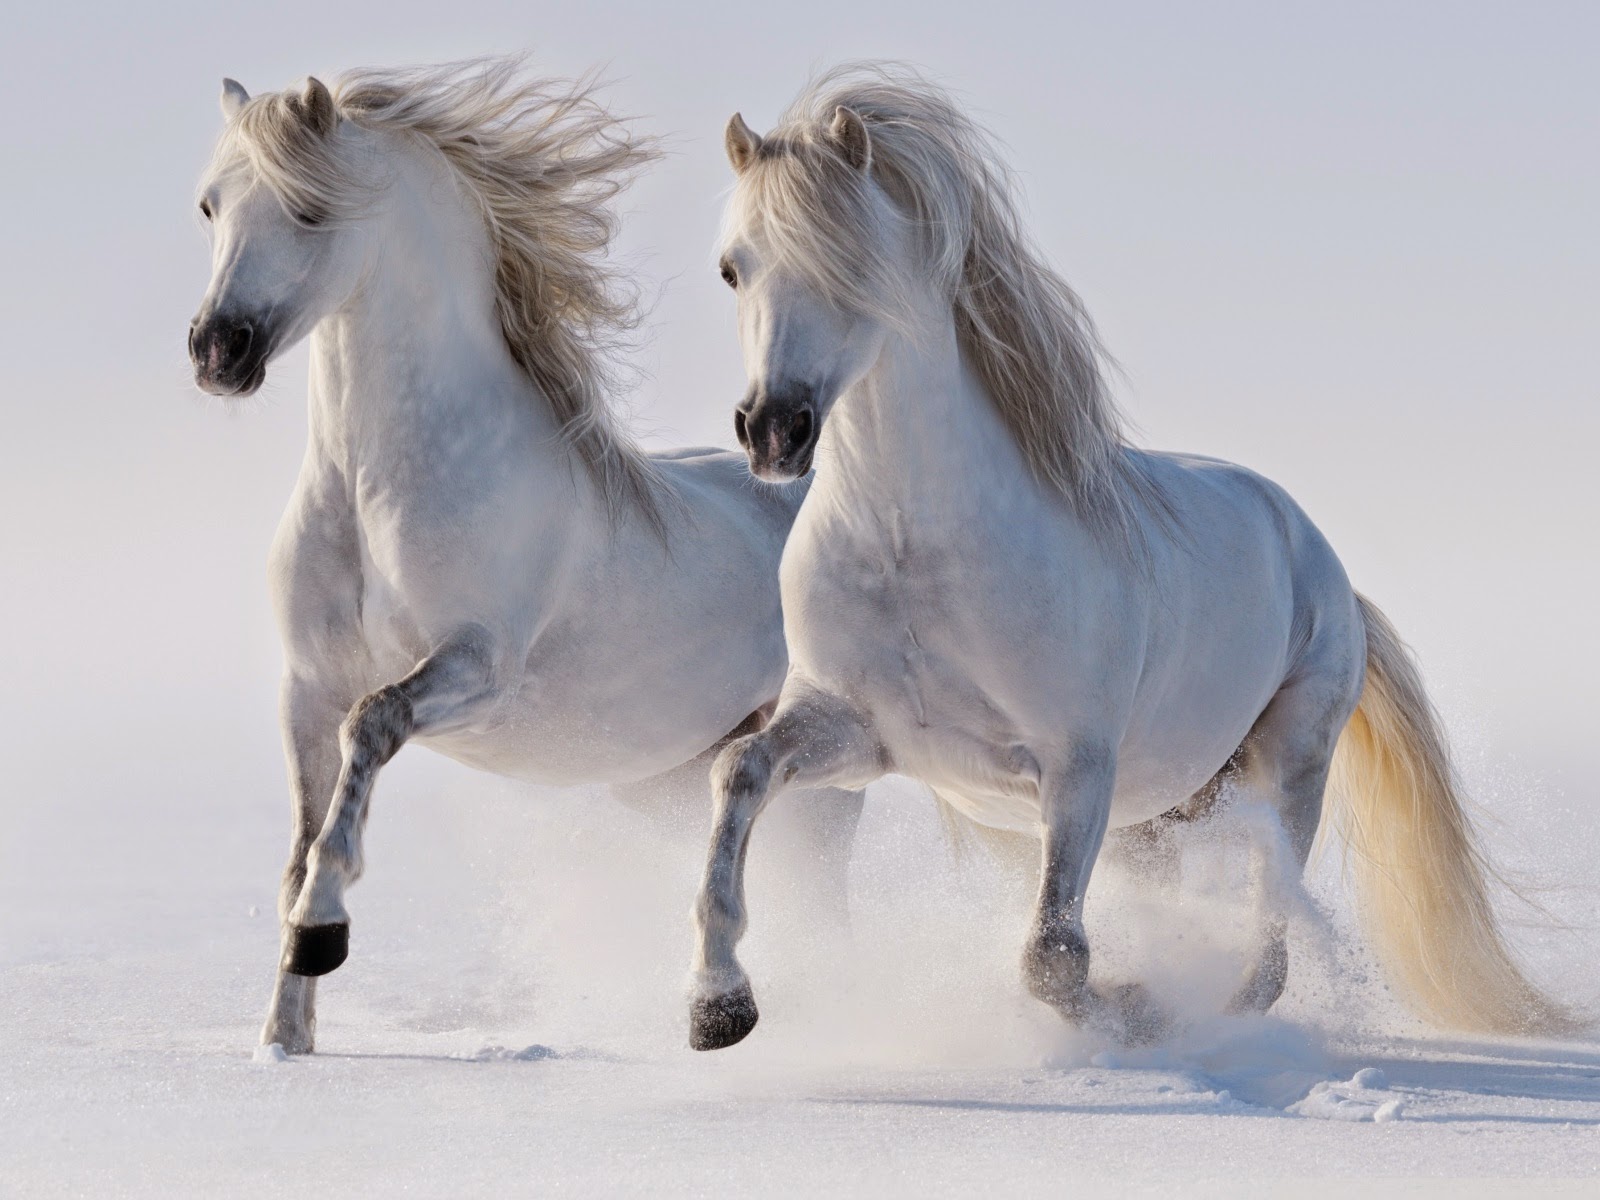 Horses Wallpapers Free Download Pc - White Horse Running Hd - 1600x1200  Wallpaper 